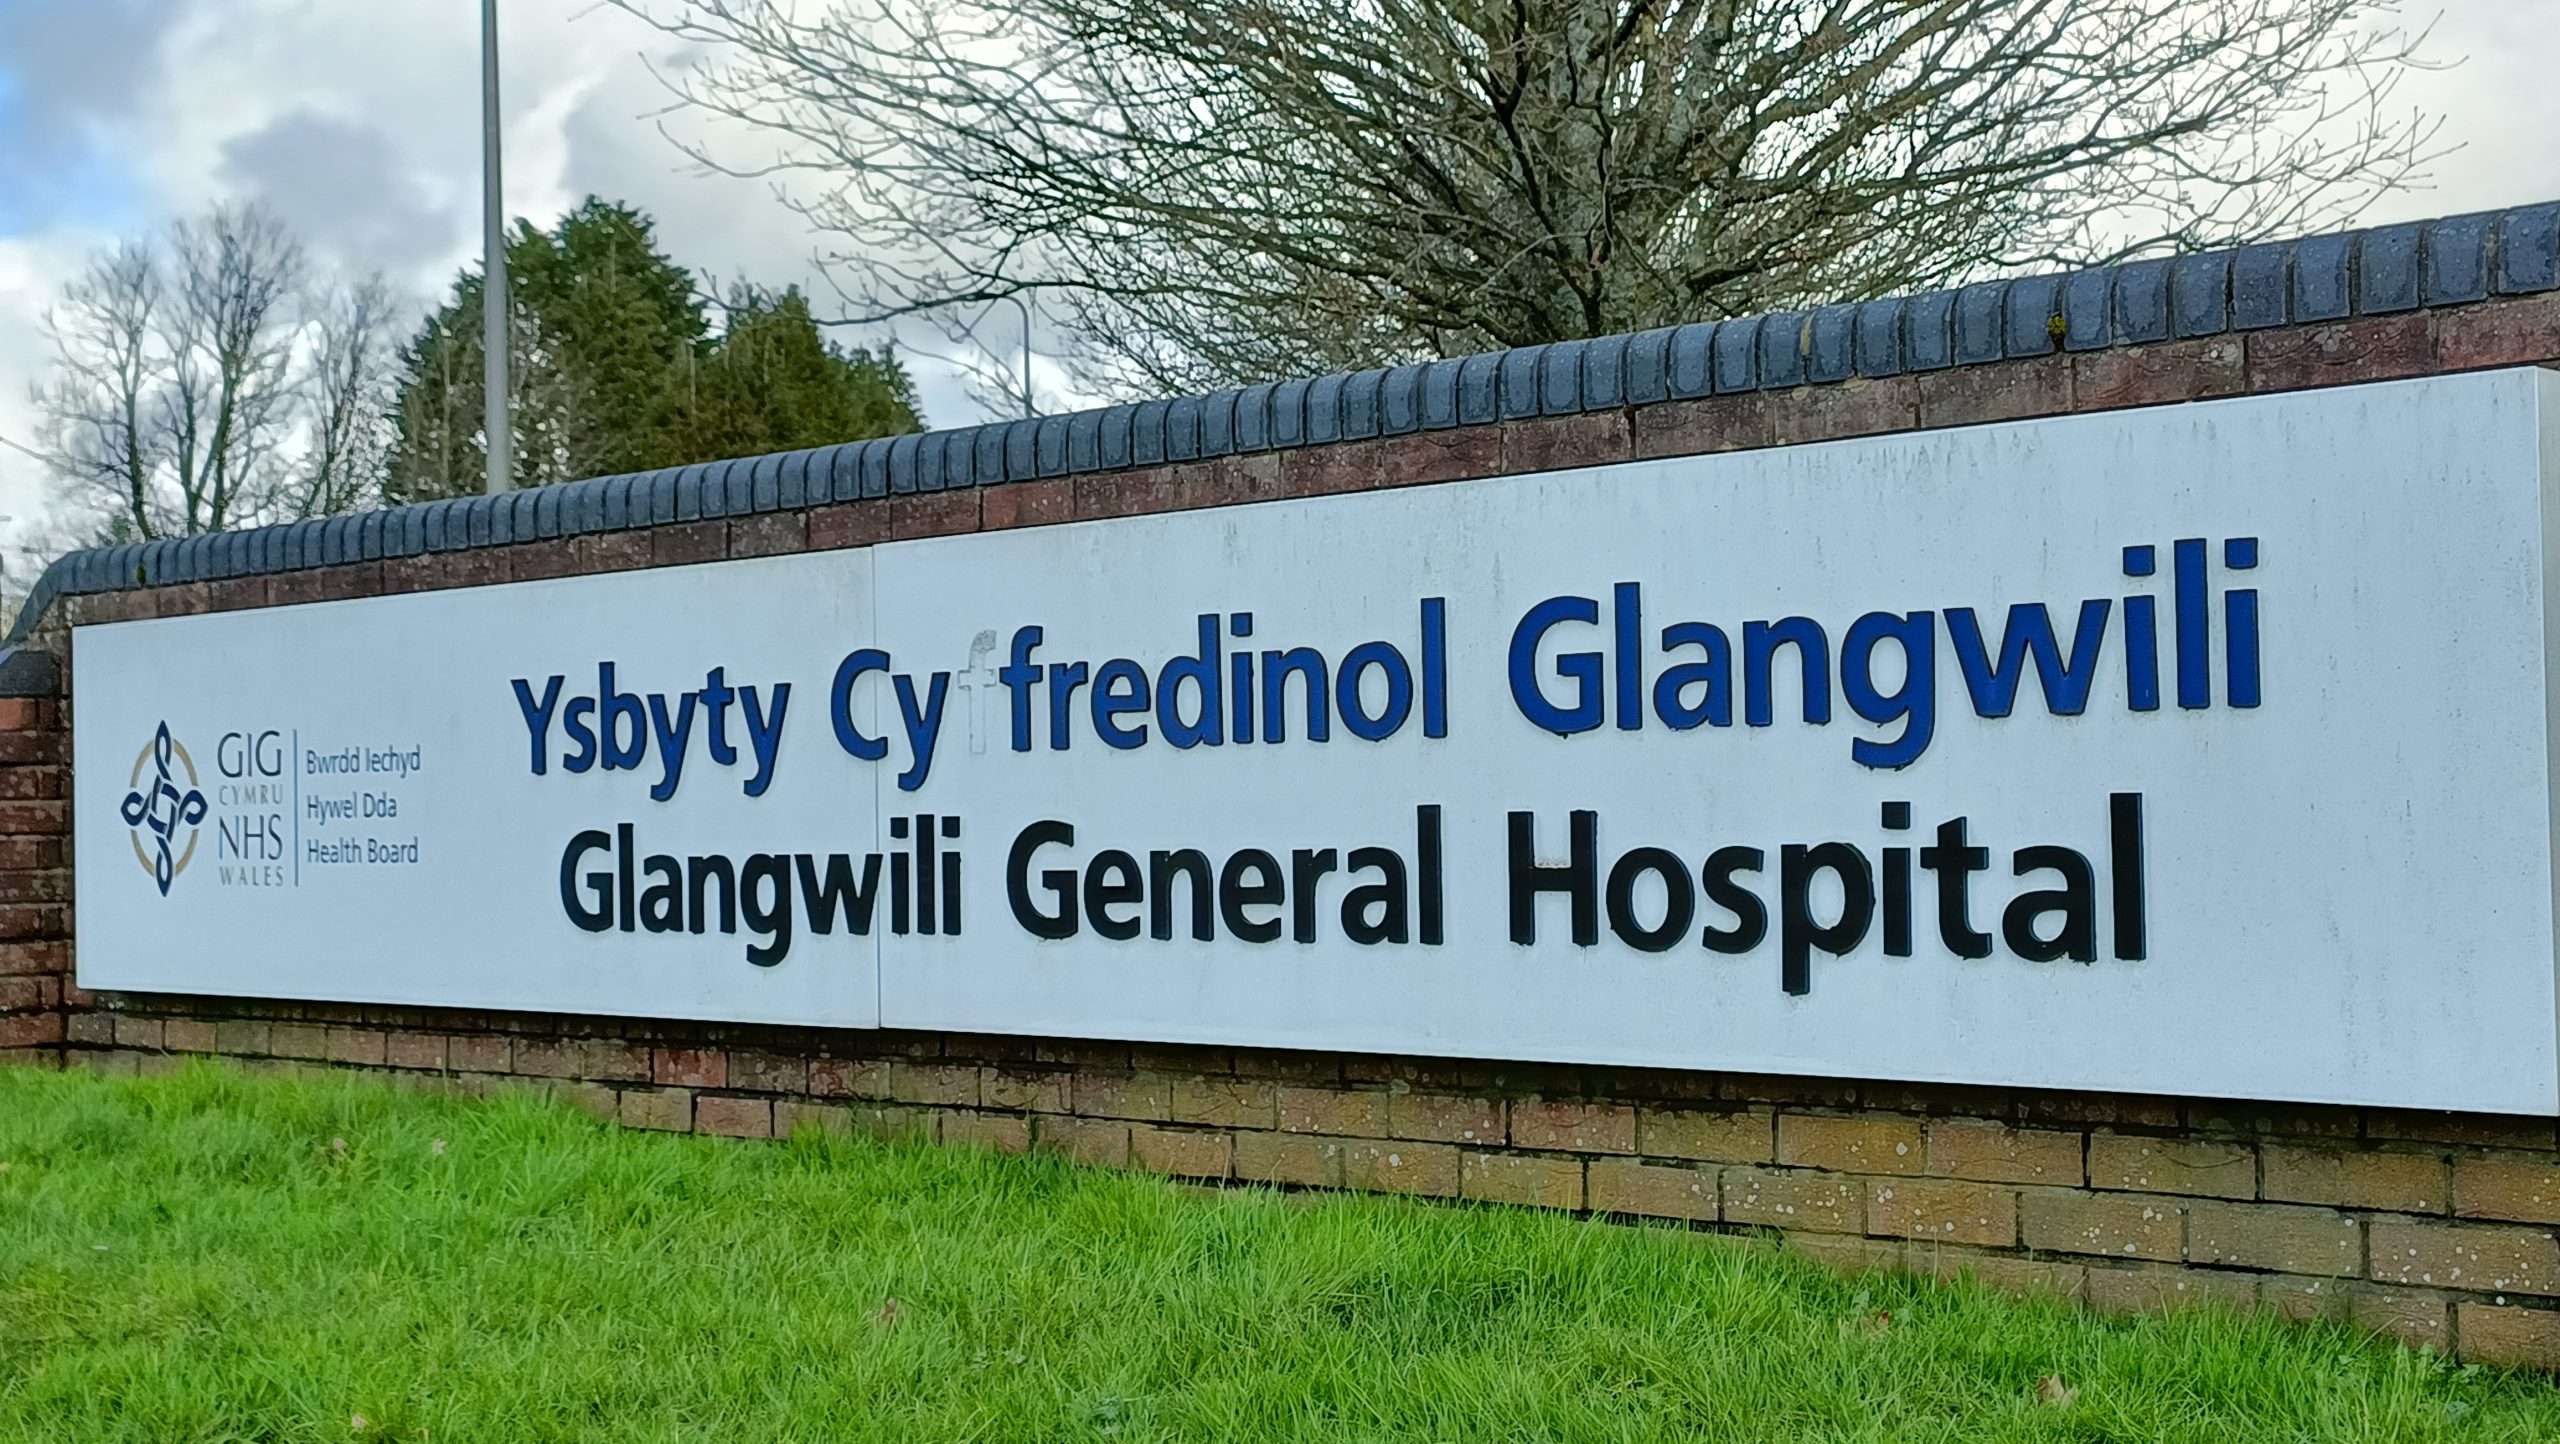 Generous donations allow charity to purchase new furniture and appliances for Cligerran Ward at Glangwili Hospital